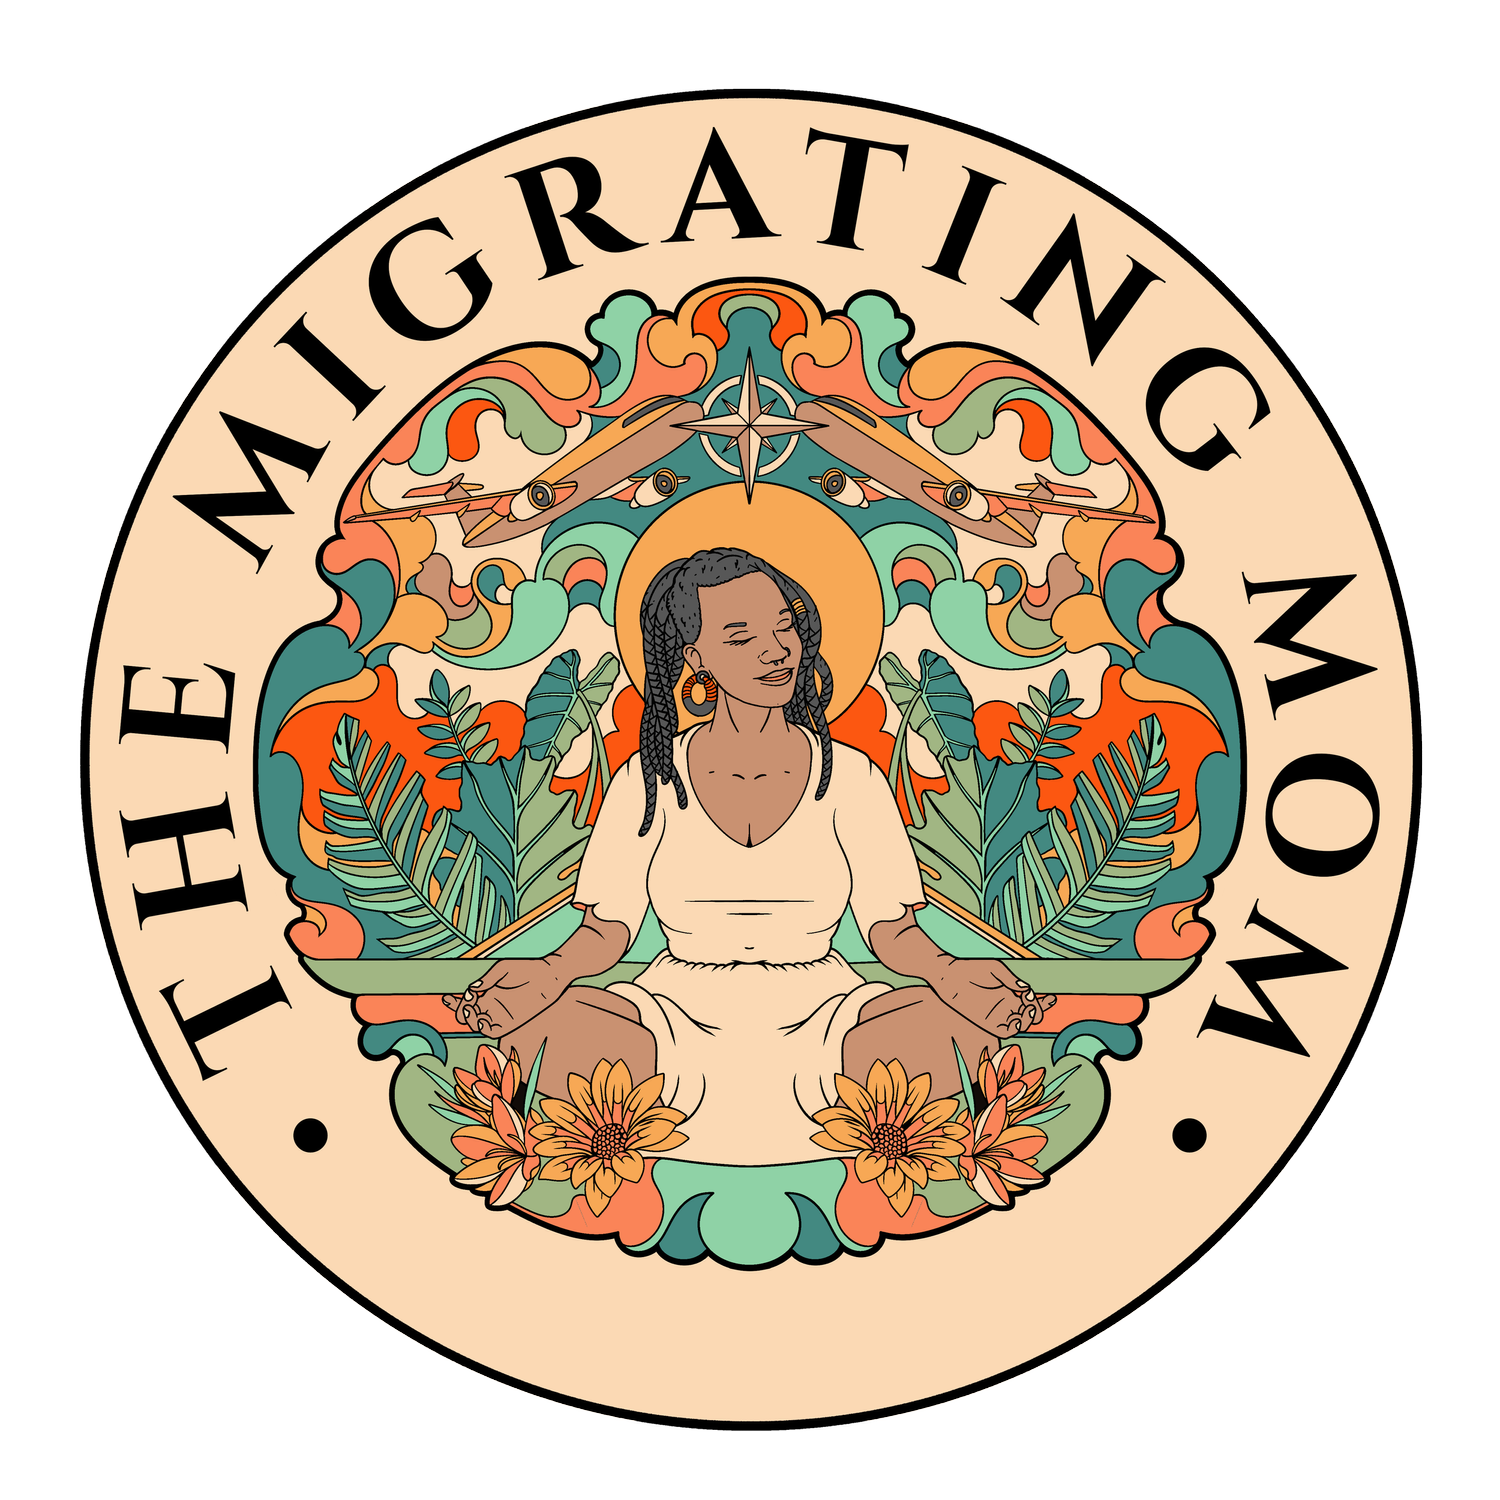 The Migrating Mom